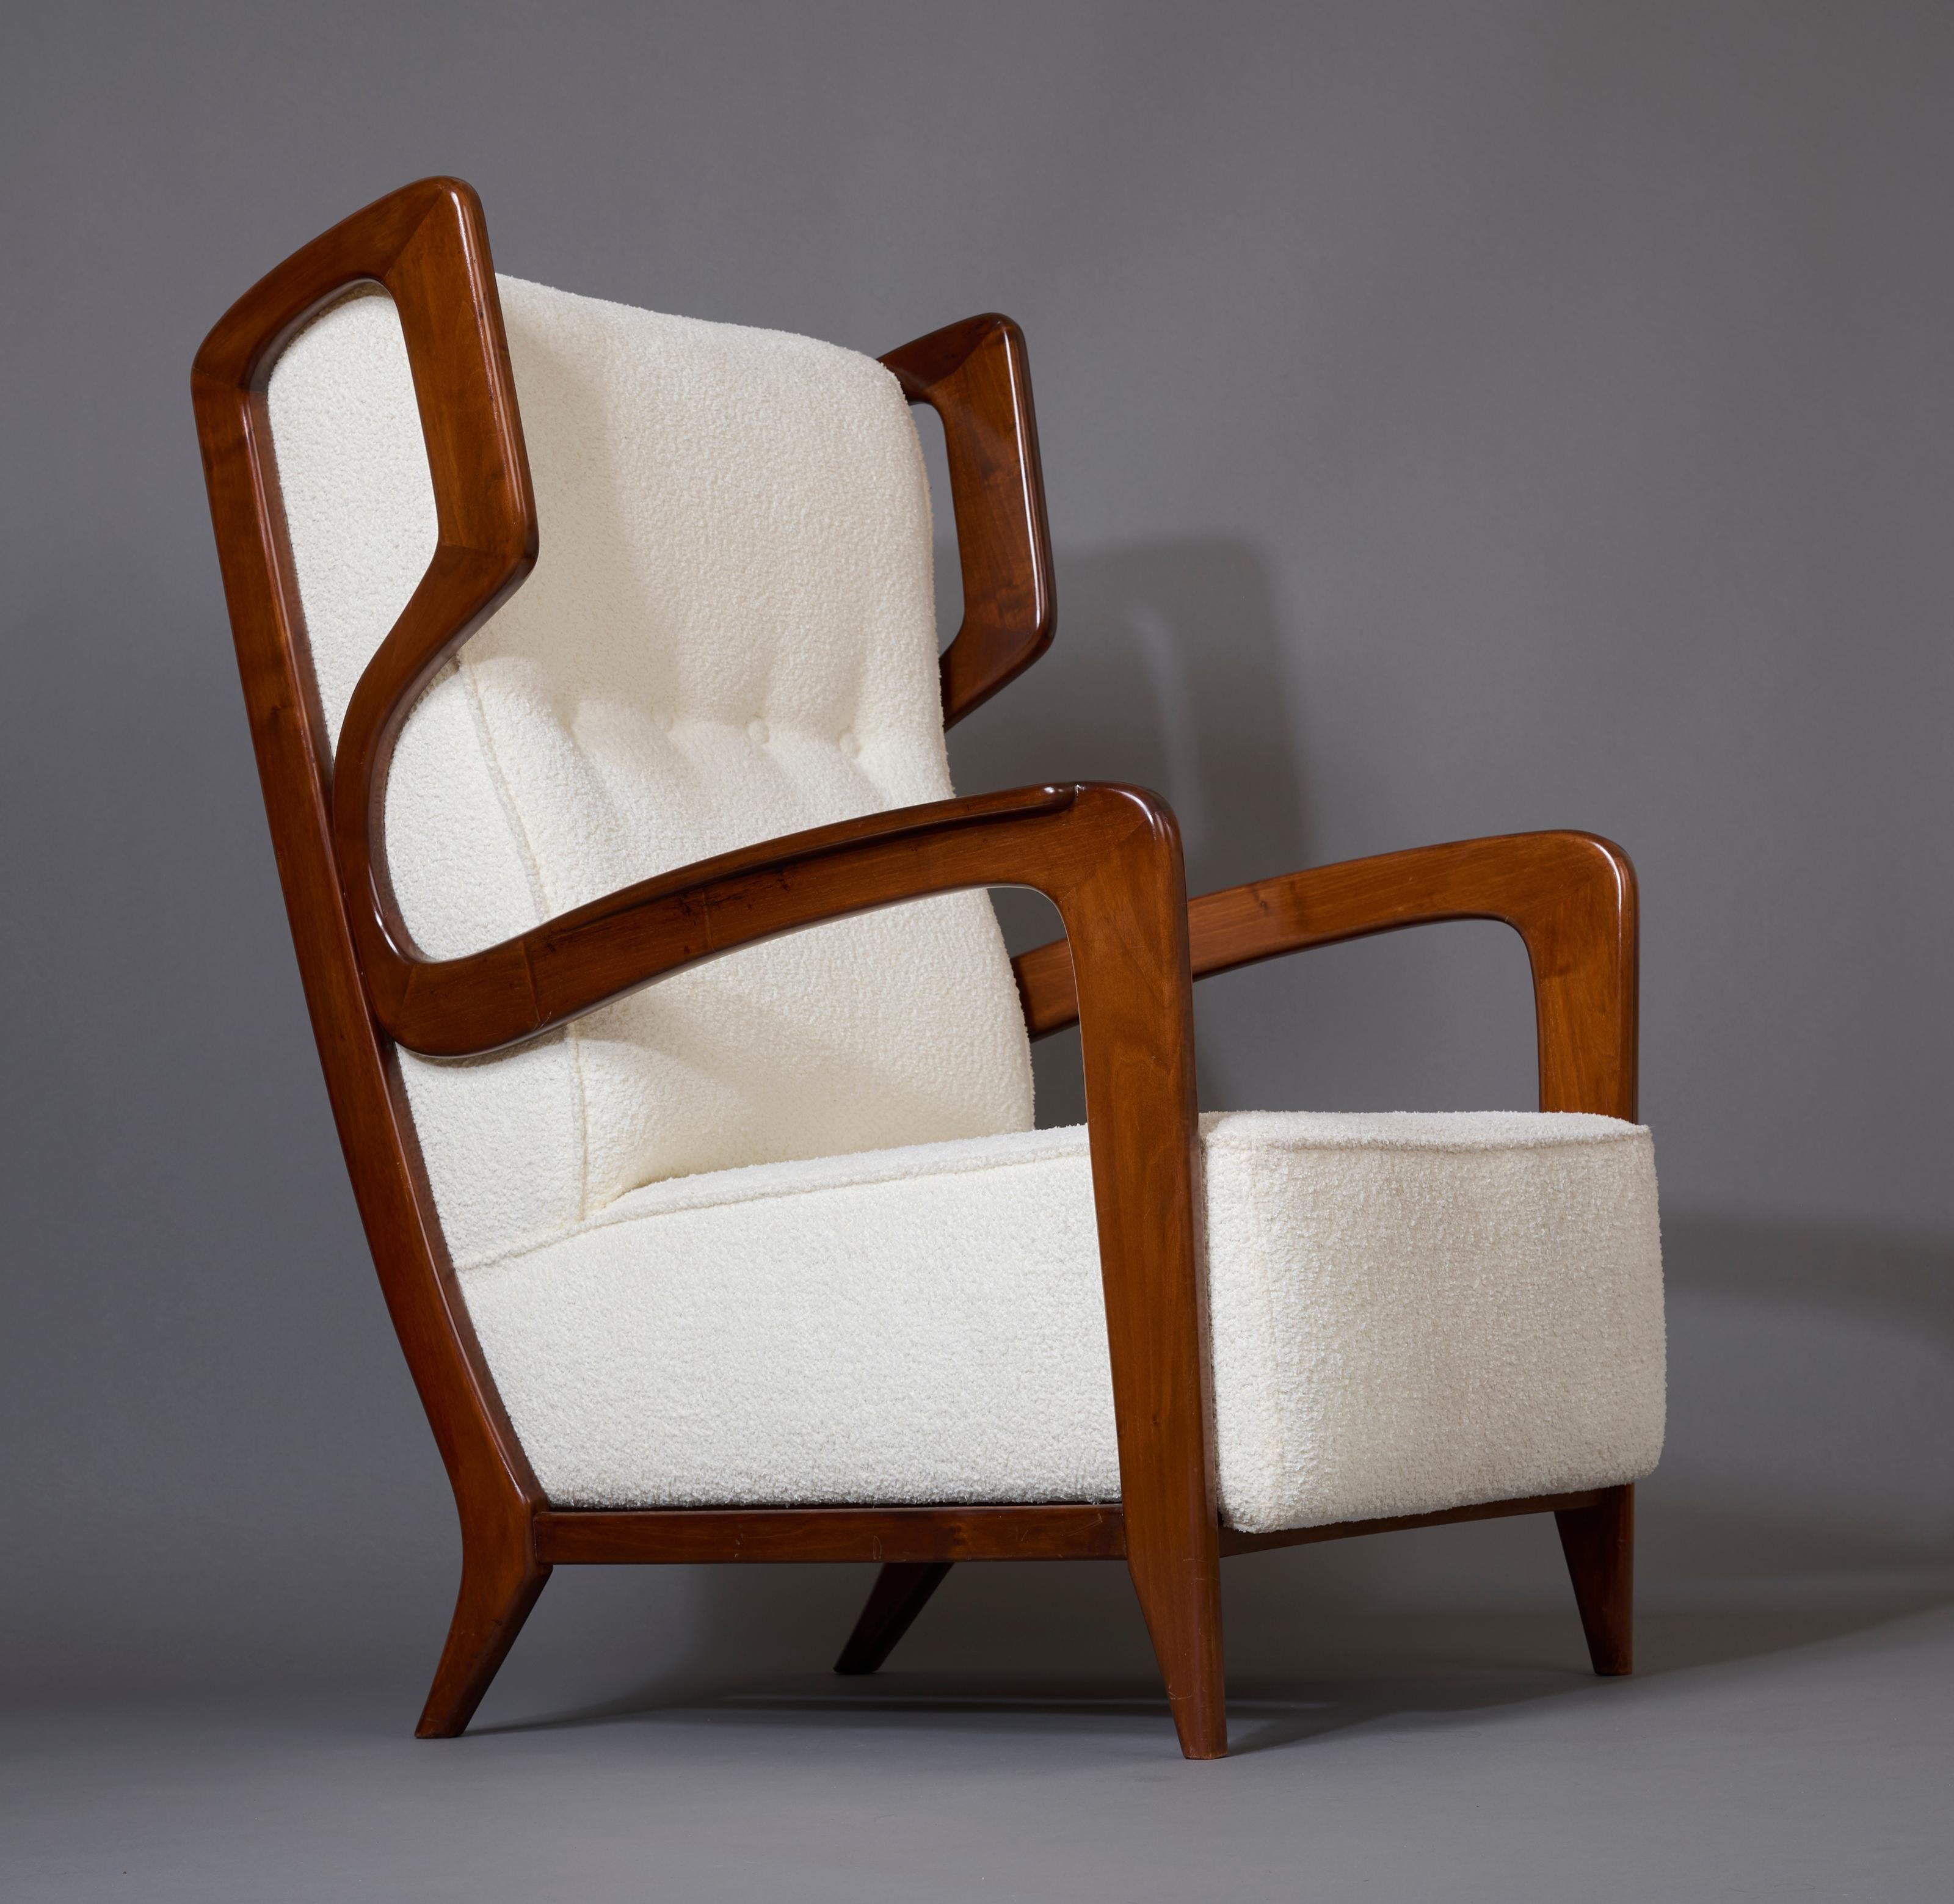 Gio Ponti, Exceptional Pair of Rare Wingback Armchairs in Walnut, Italy, 1940s For Sale 10